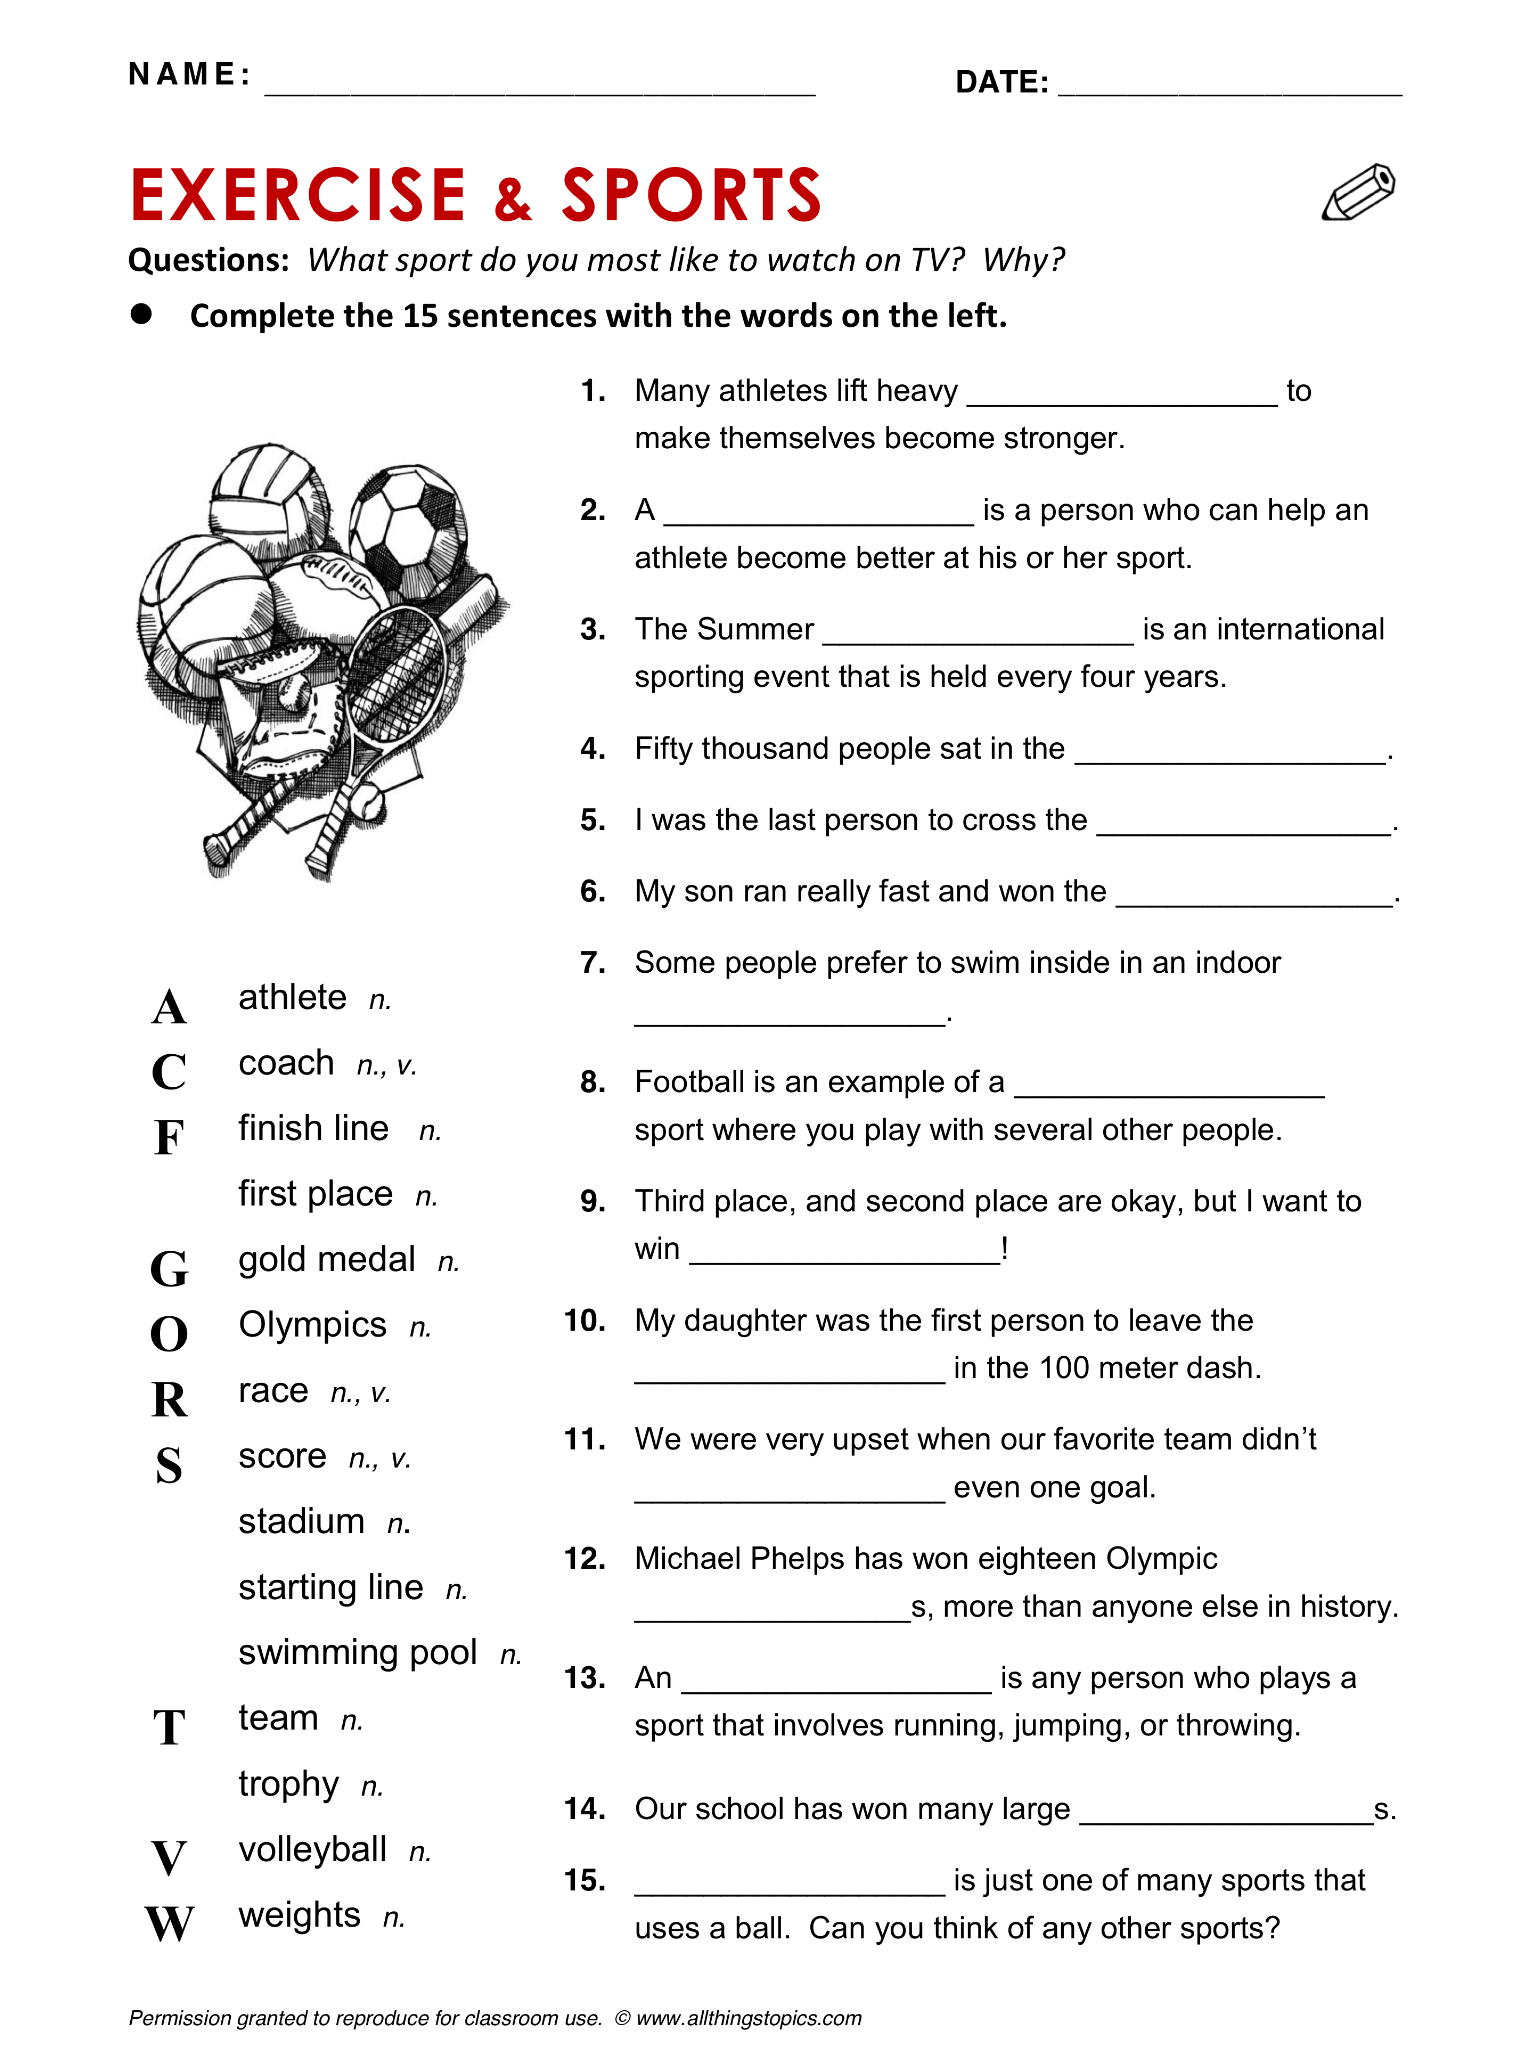 What questions did these people. Sport and exercise английский. Sport Vocabulary exercises. Sport Worksheets. Vocabulary exercises in English.